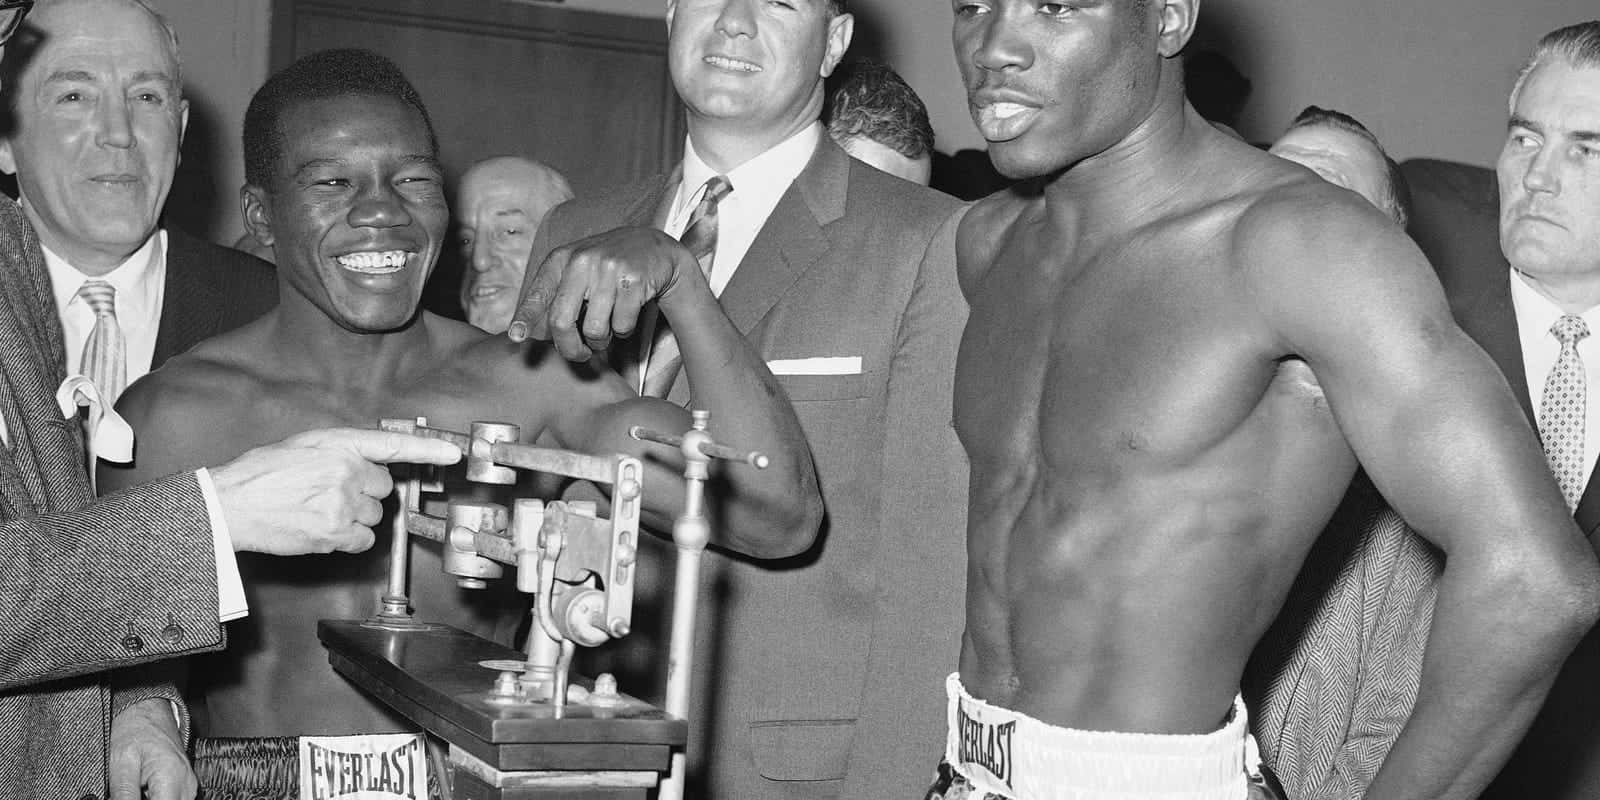 Emile Griffith Benny Paret Weighing Background